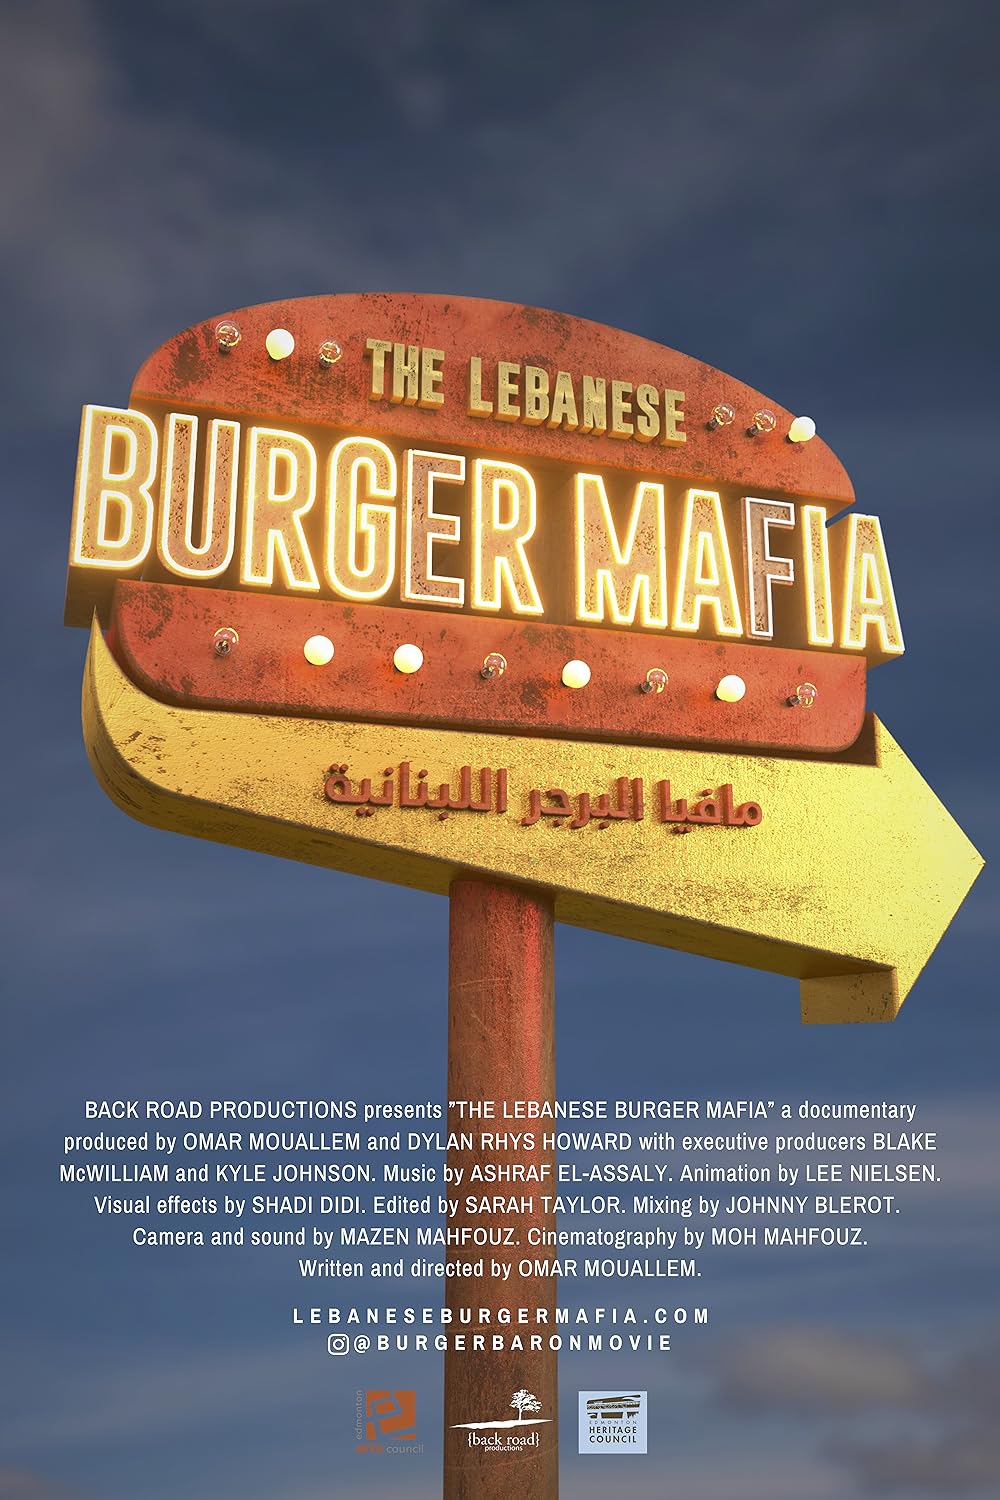 A burger-shaped restaurant sign behind a clear sky that says “The Lebanese Burger Mafia” with a yellow arrow underneath and Arabic text underneath.